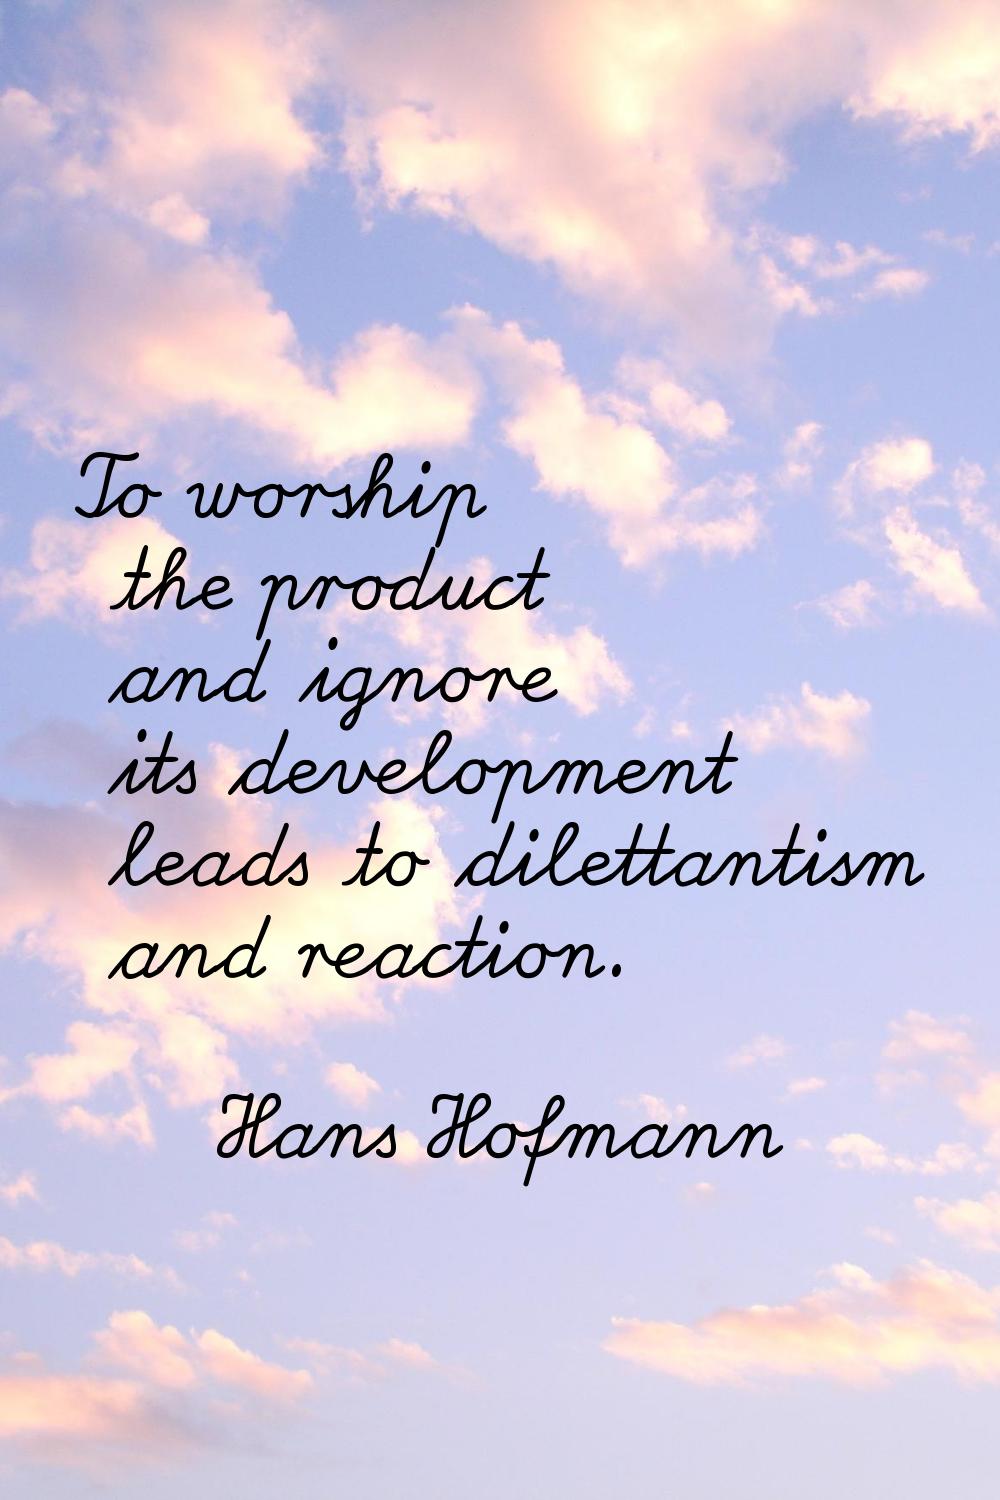 To worship the product and ignore its development leads to dilettantism and reaction.